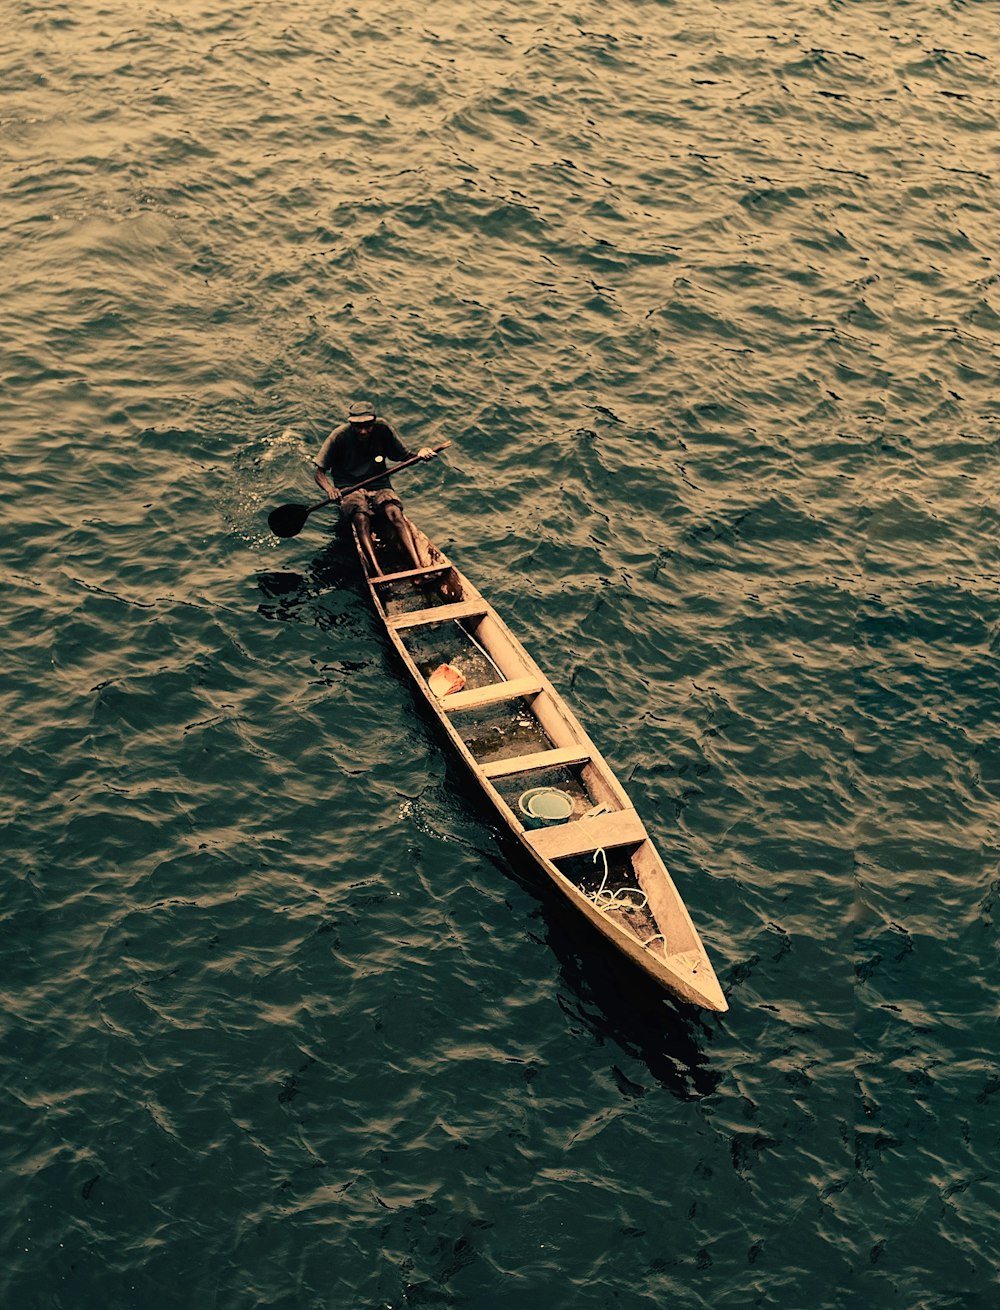 a row boat in the middle of a body of water